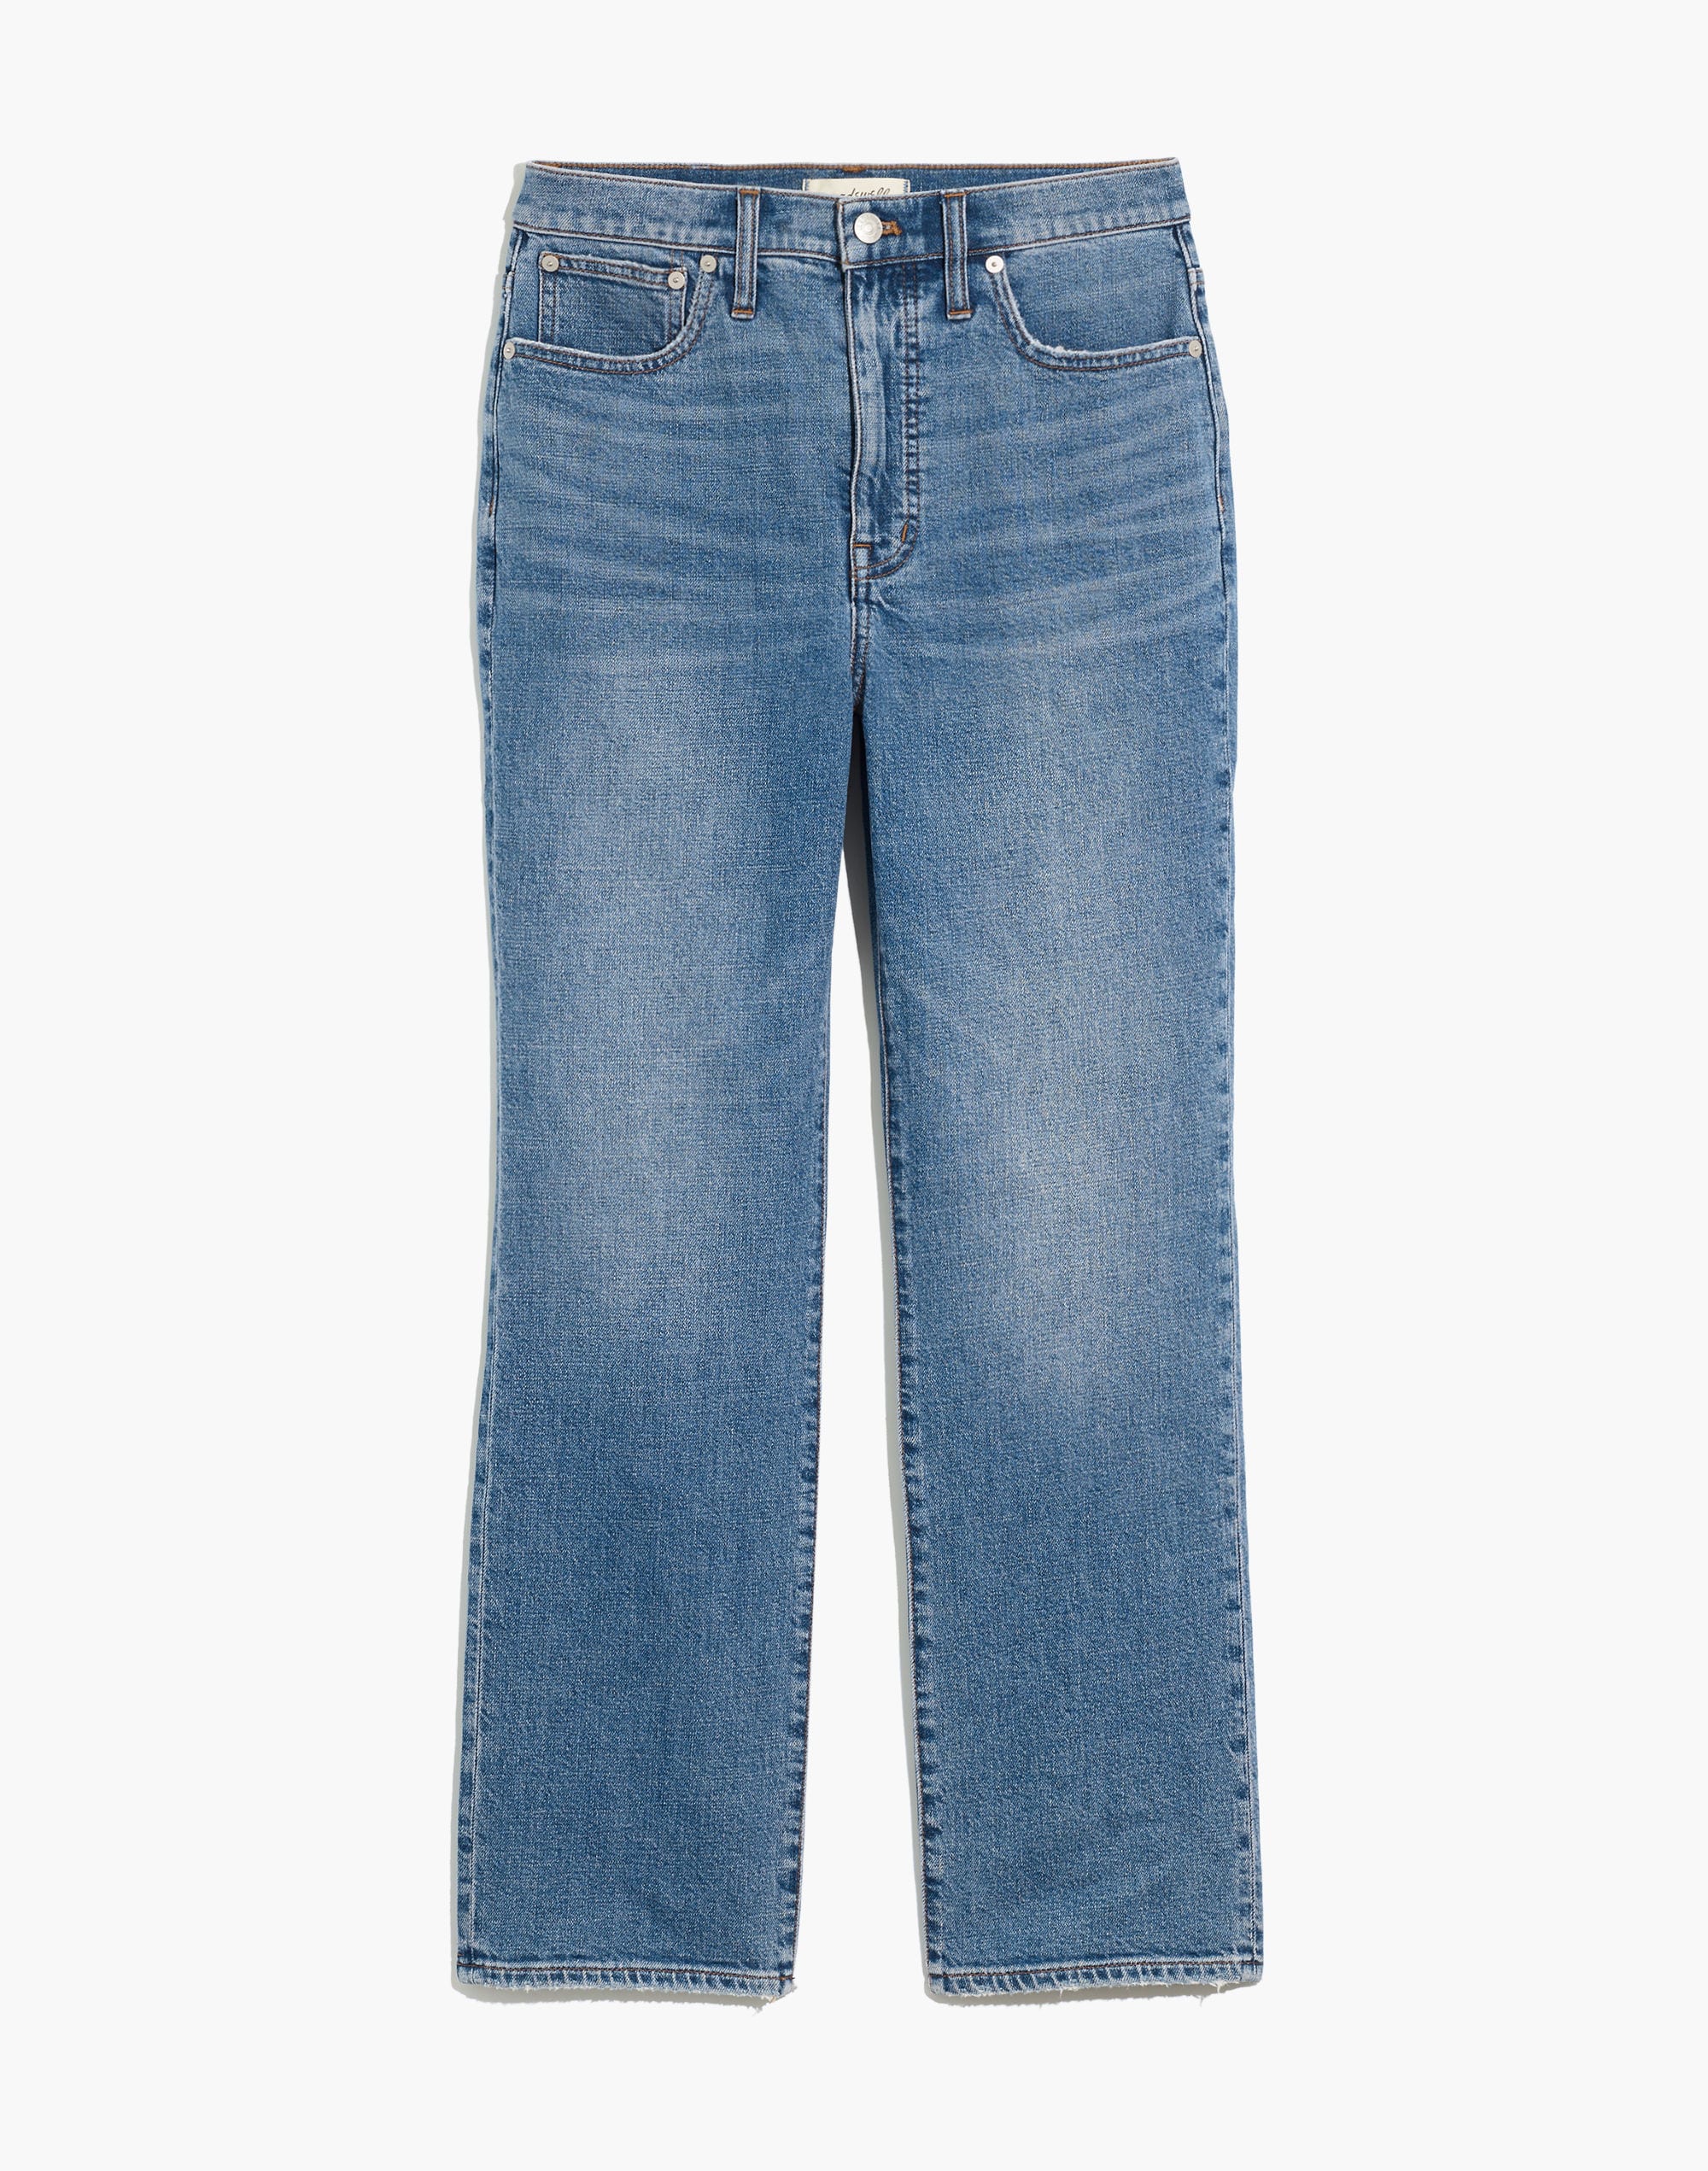 Tall Slim Demi-Boot Jeans in Enright Wash